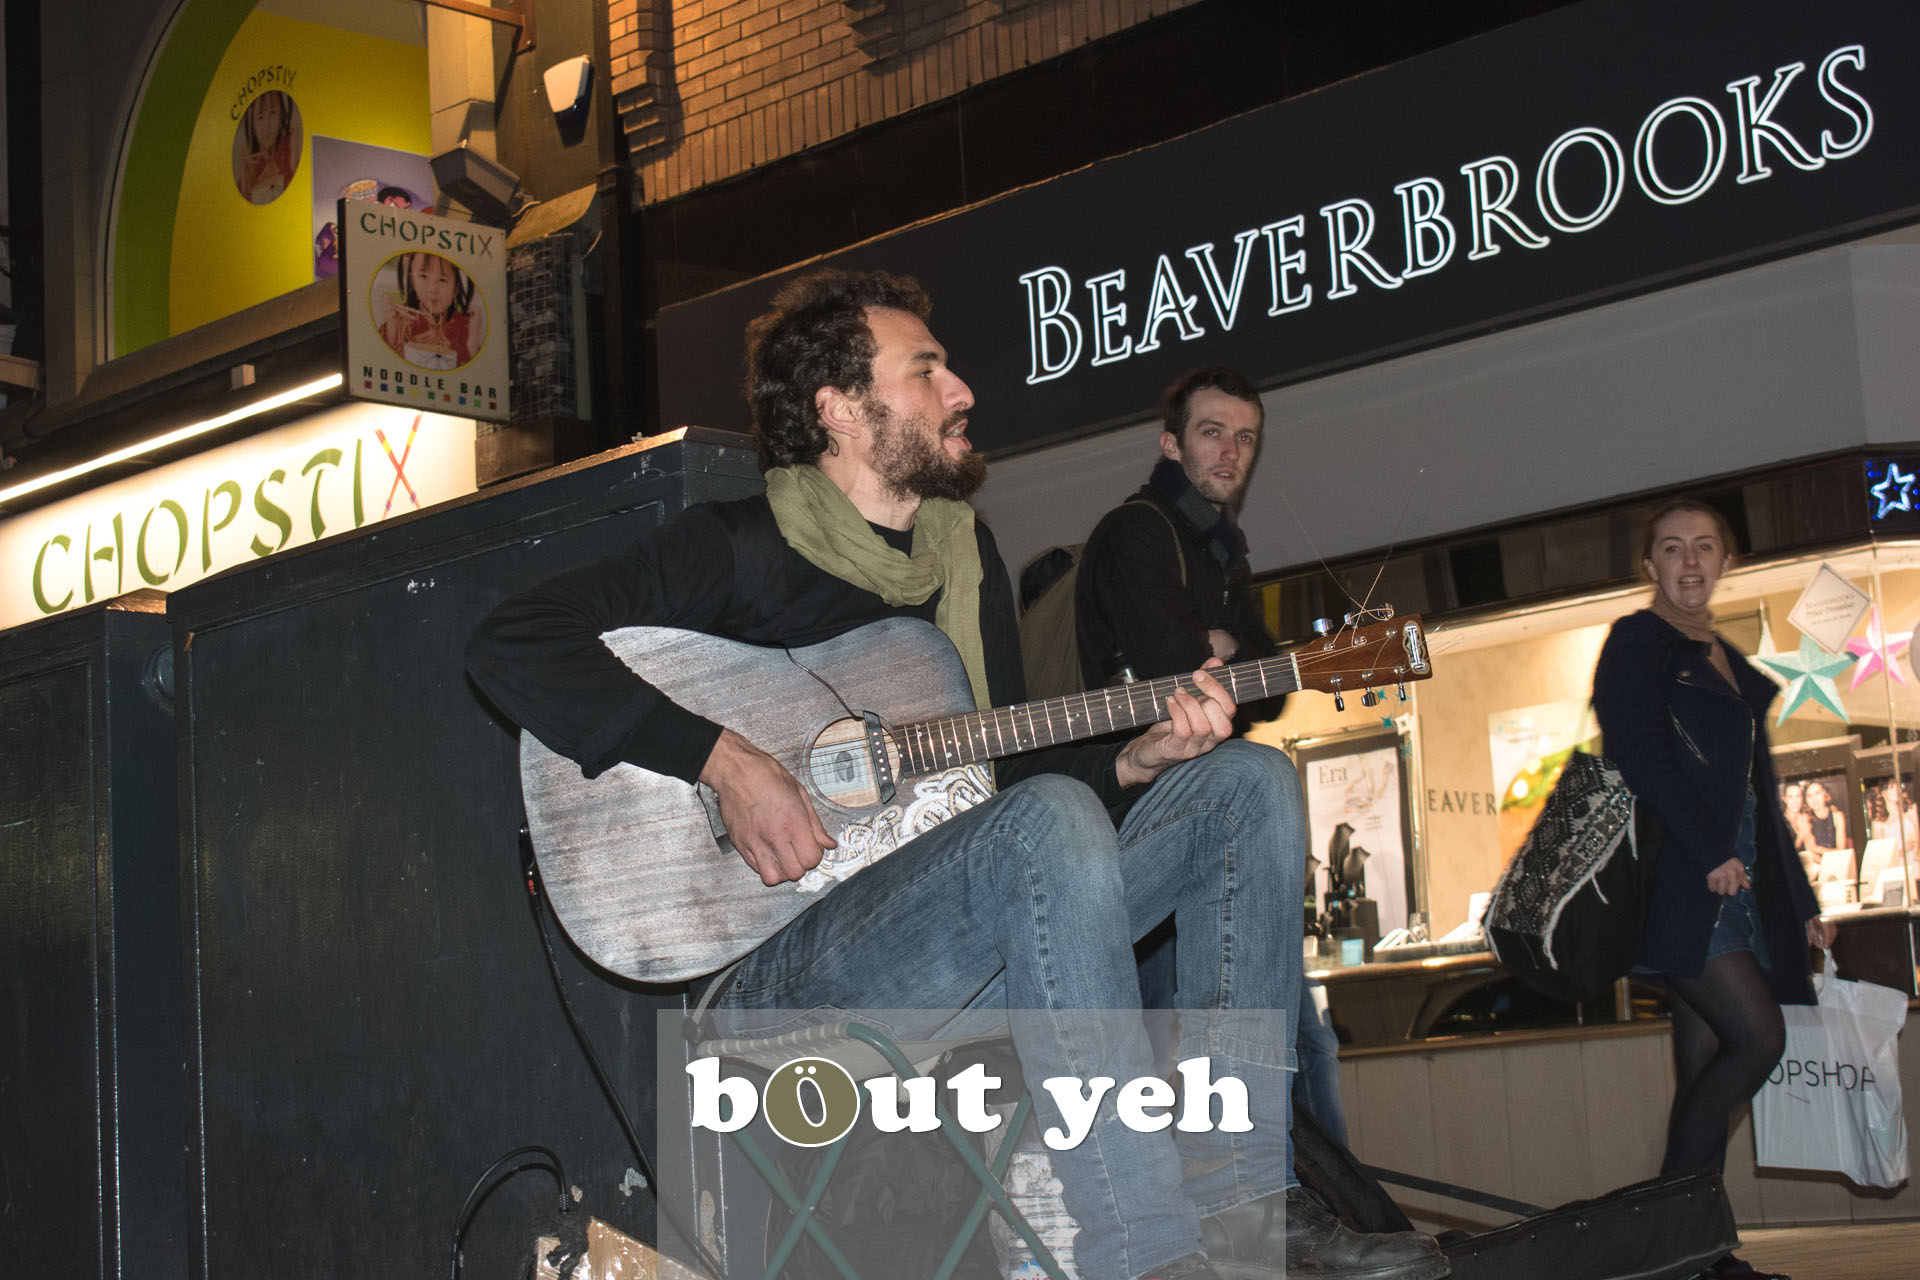 Australian busker playing guitar in Donegal Place, Belfast - bout yeh photographers Belfast photo 3388.